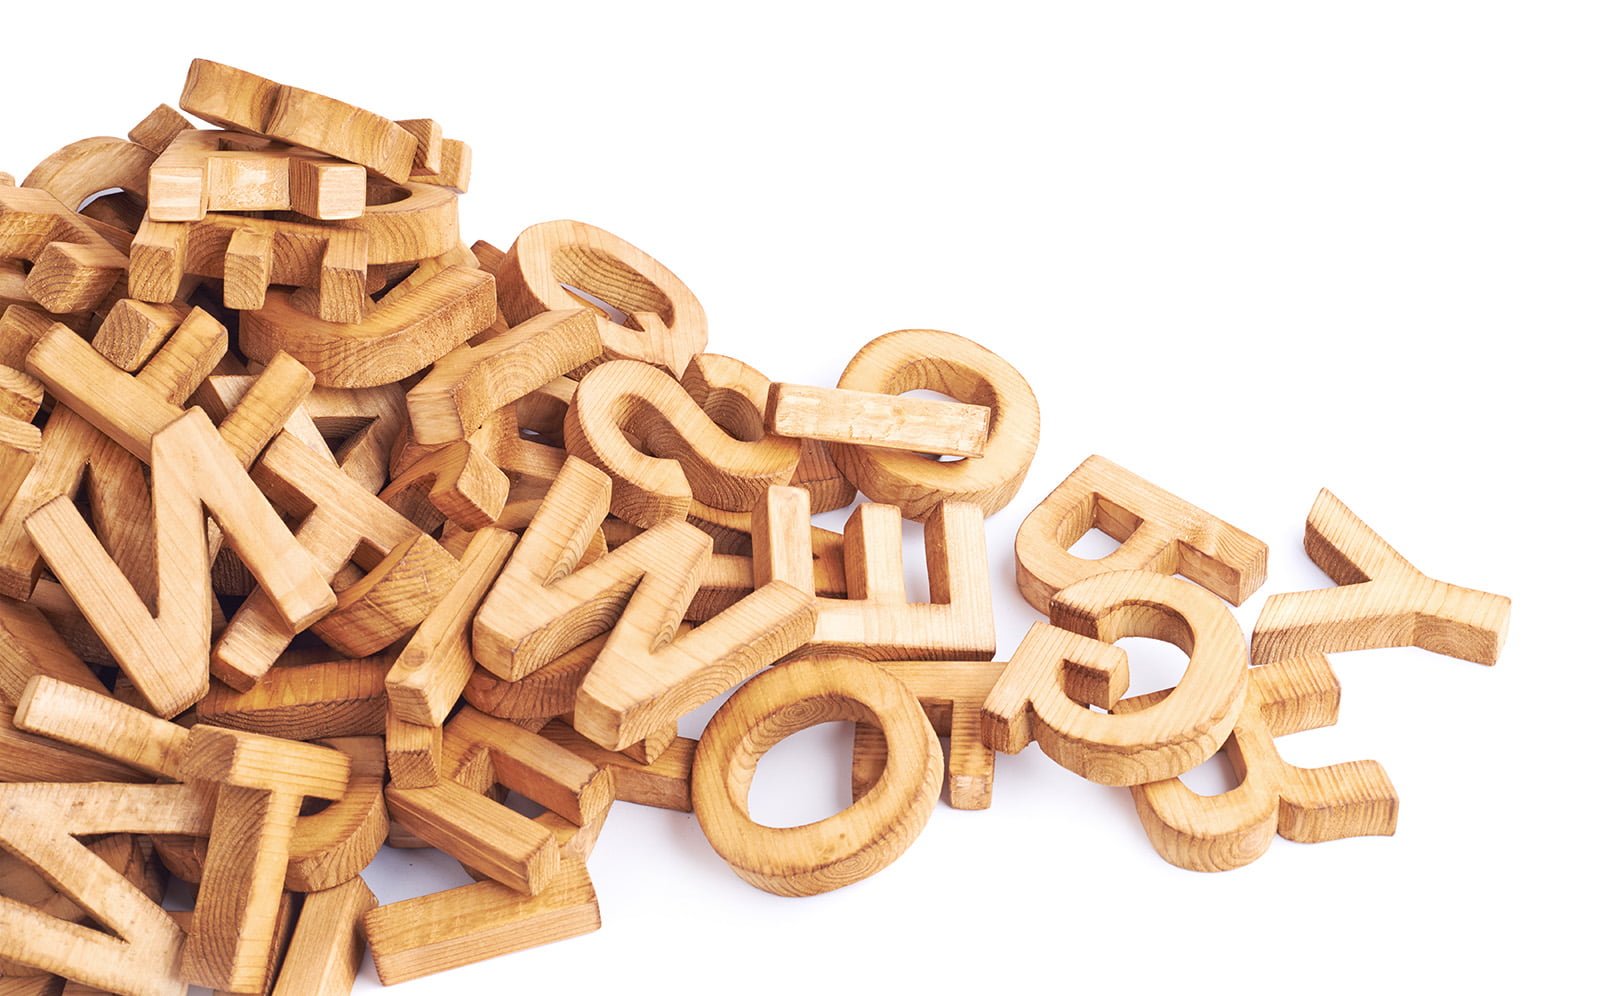 Making Norwegian words from wooden letters